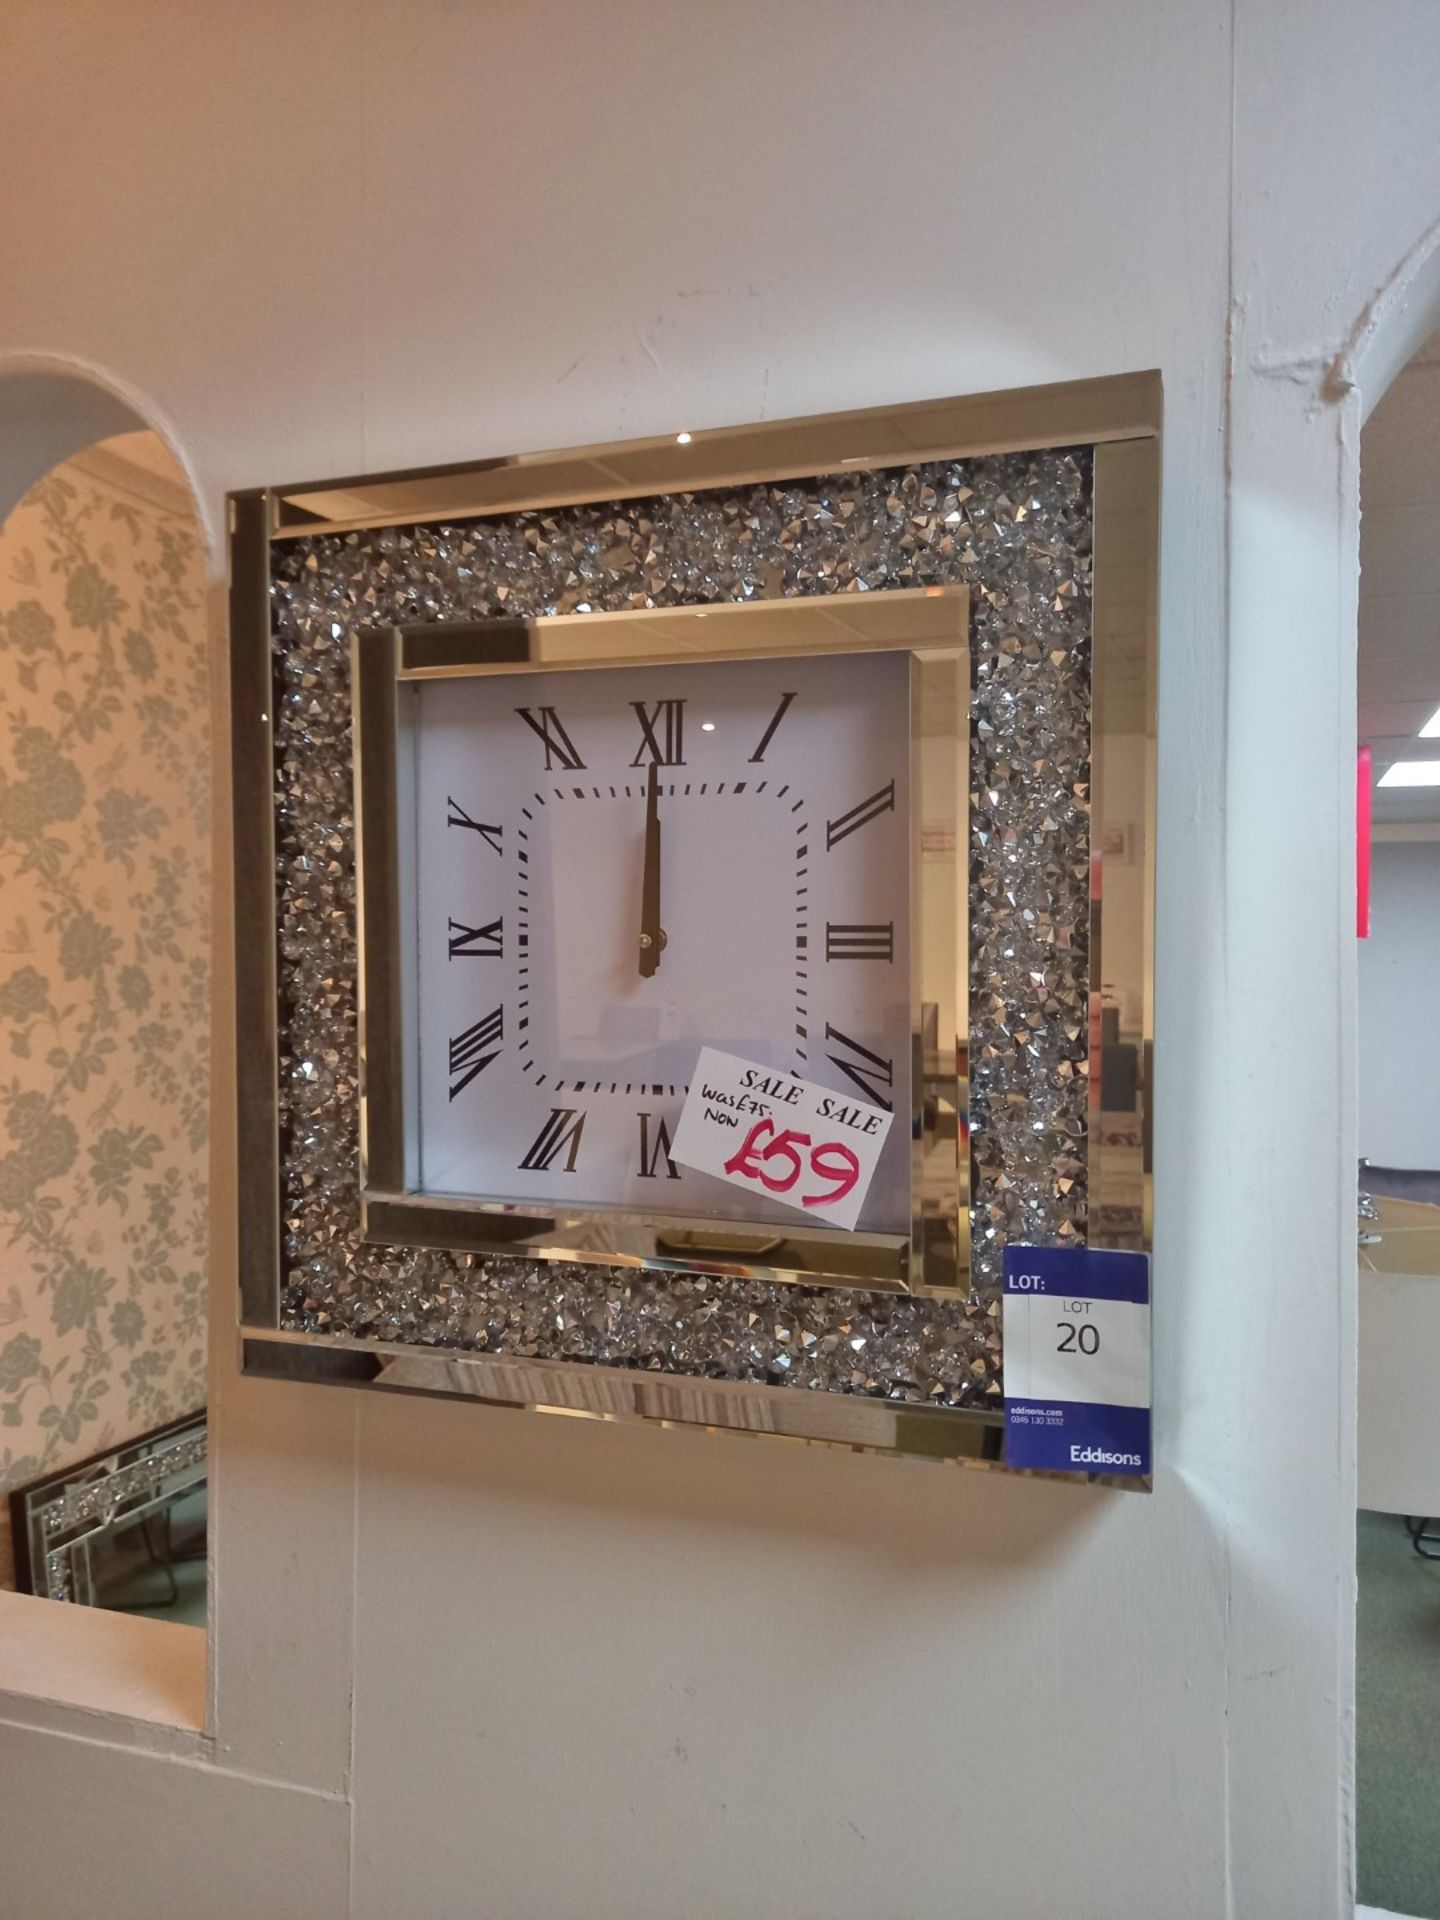 Wall Mounted Clock Rrp. £59 - Image 2 of 4